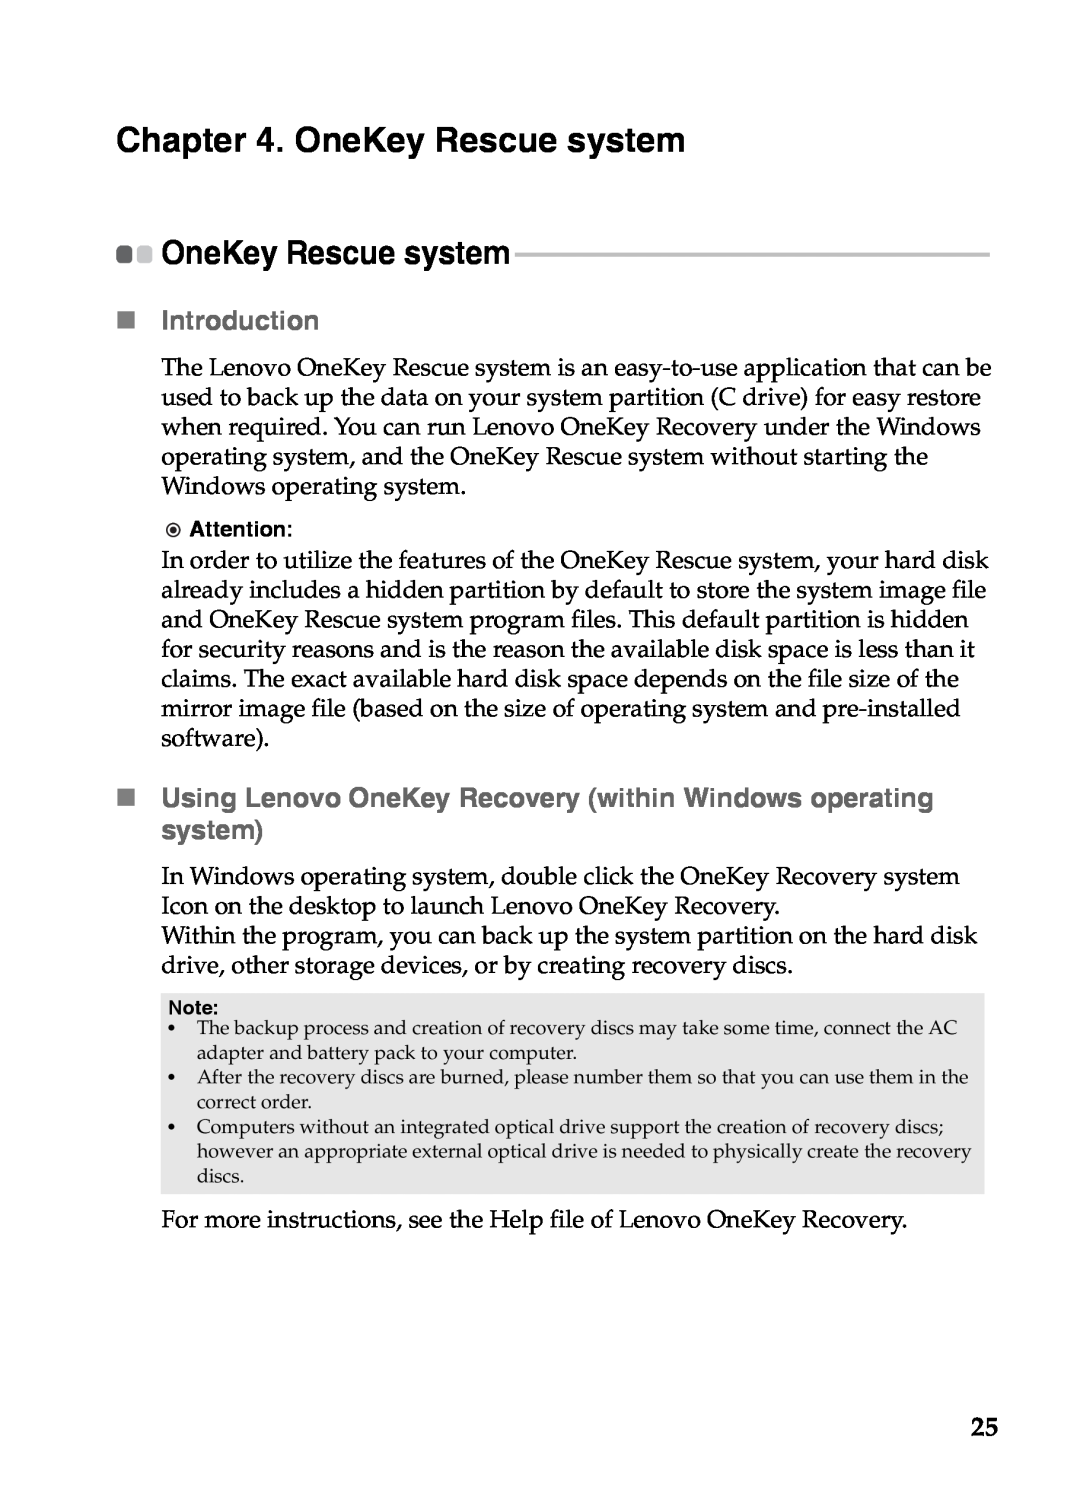 Lenovo S110 manual OneKey Rescue system, „Introduction 